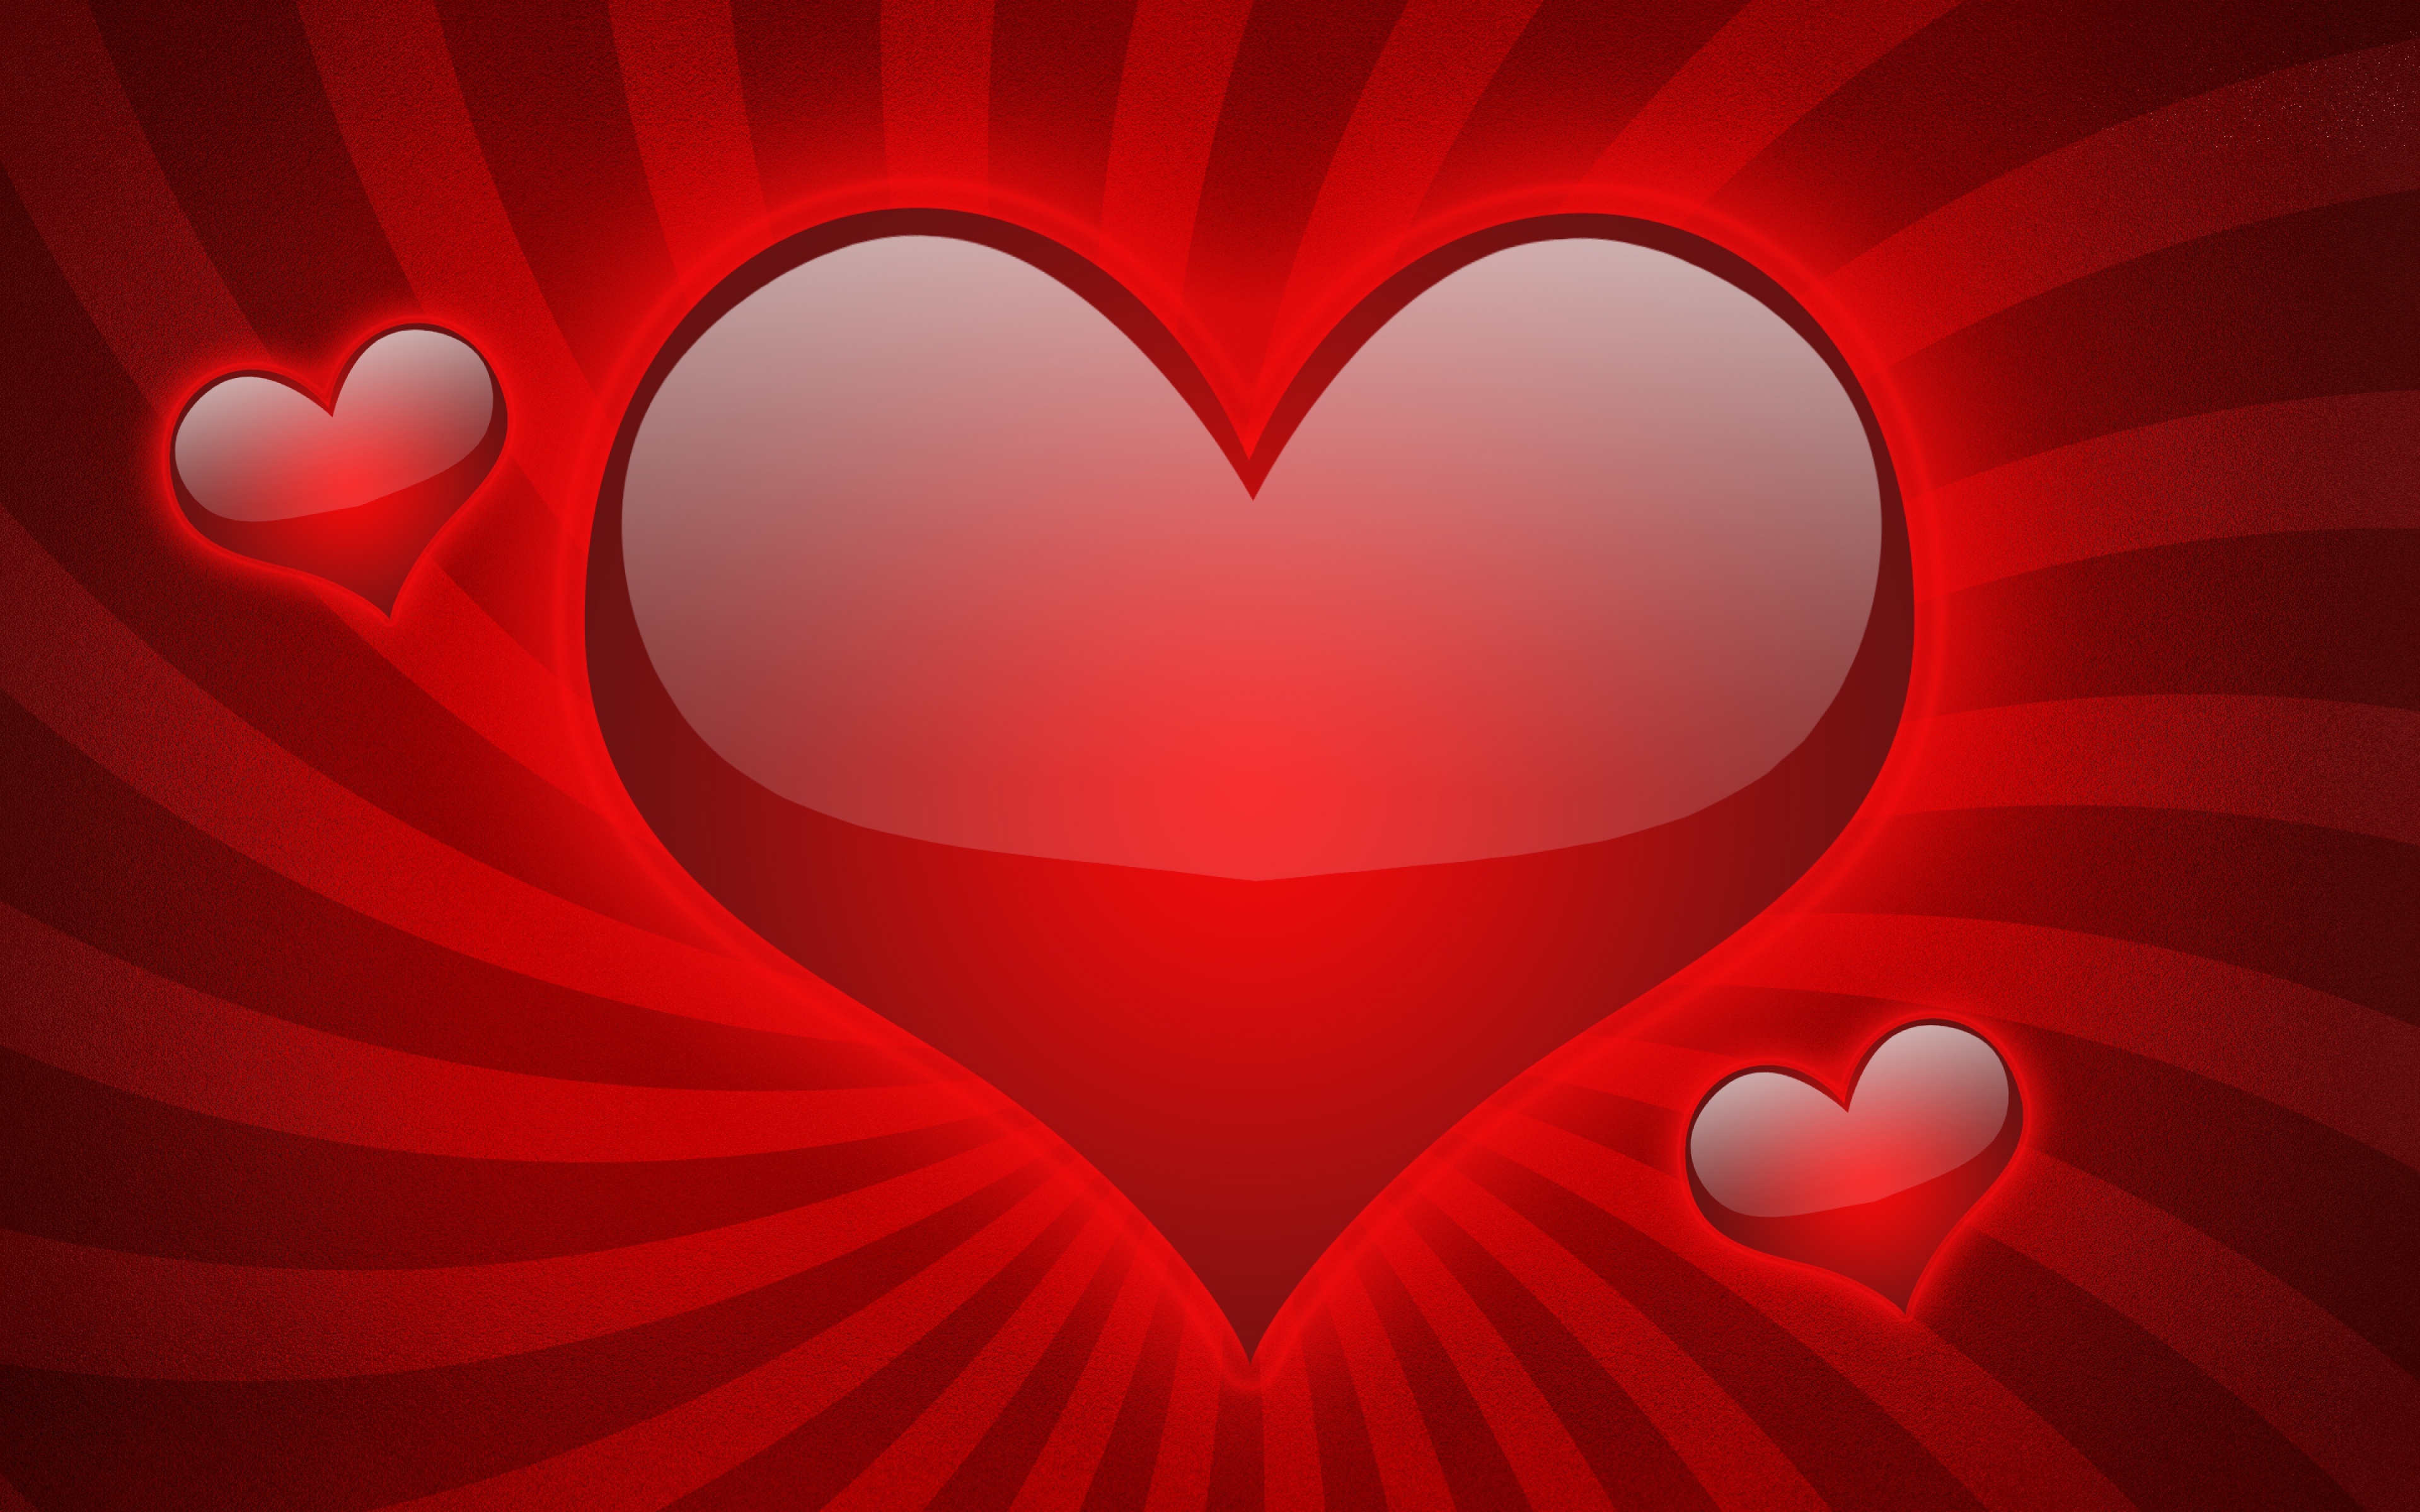 Red Hearts 3d Laptop Wallpaper Cool Laptop Wallpapers Images